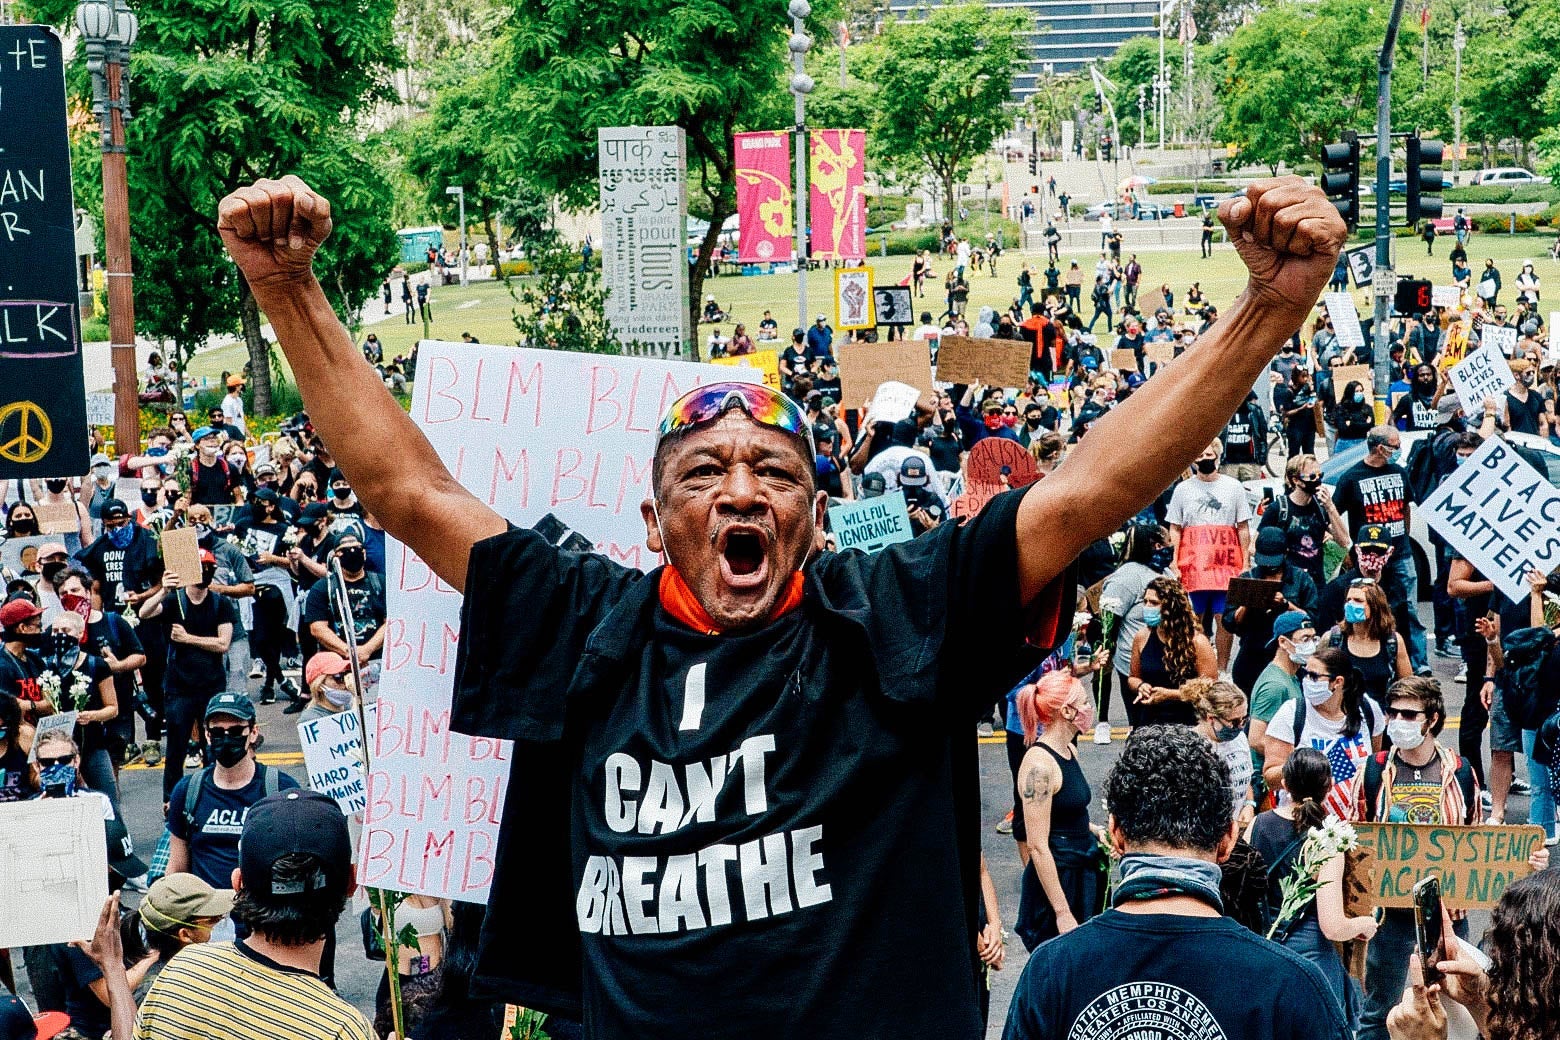 A man in a T-shirt that reads "I can't breath" holds up both arms amid a crowd of protesters.